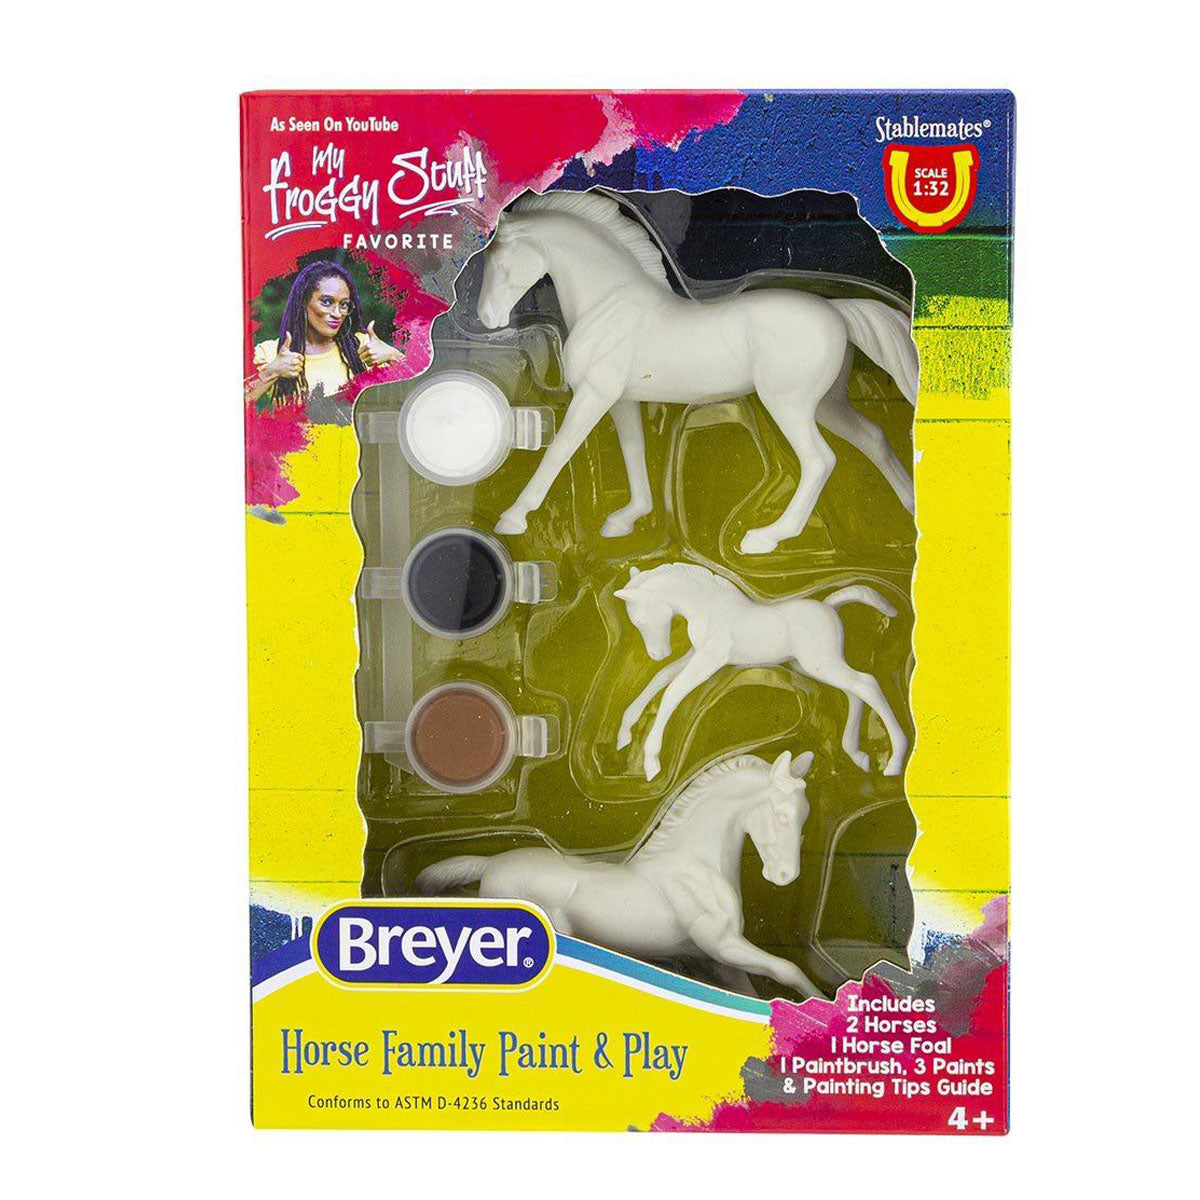 Breyer Stablemates Horse Family Paint & Play